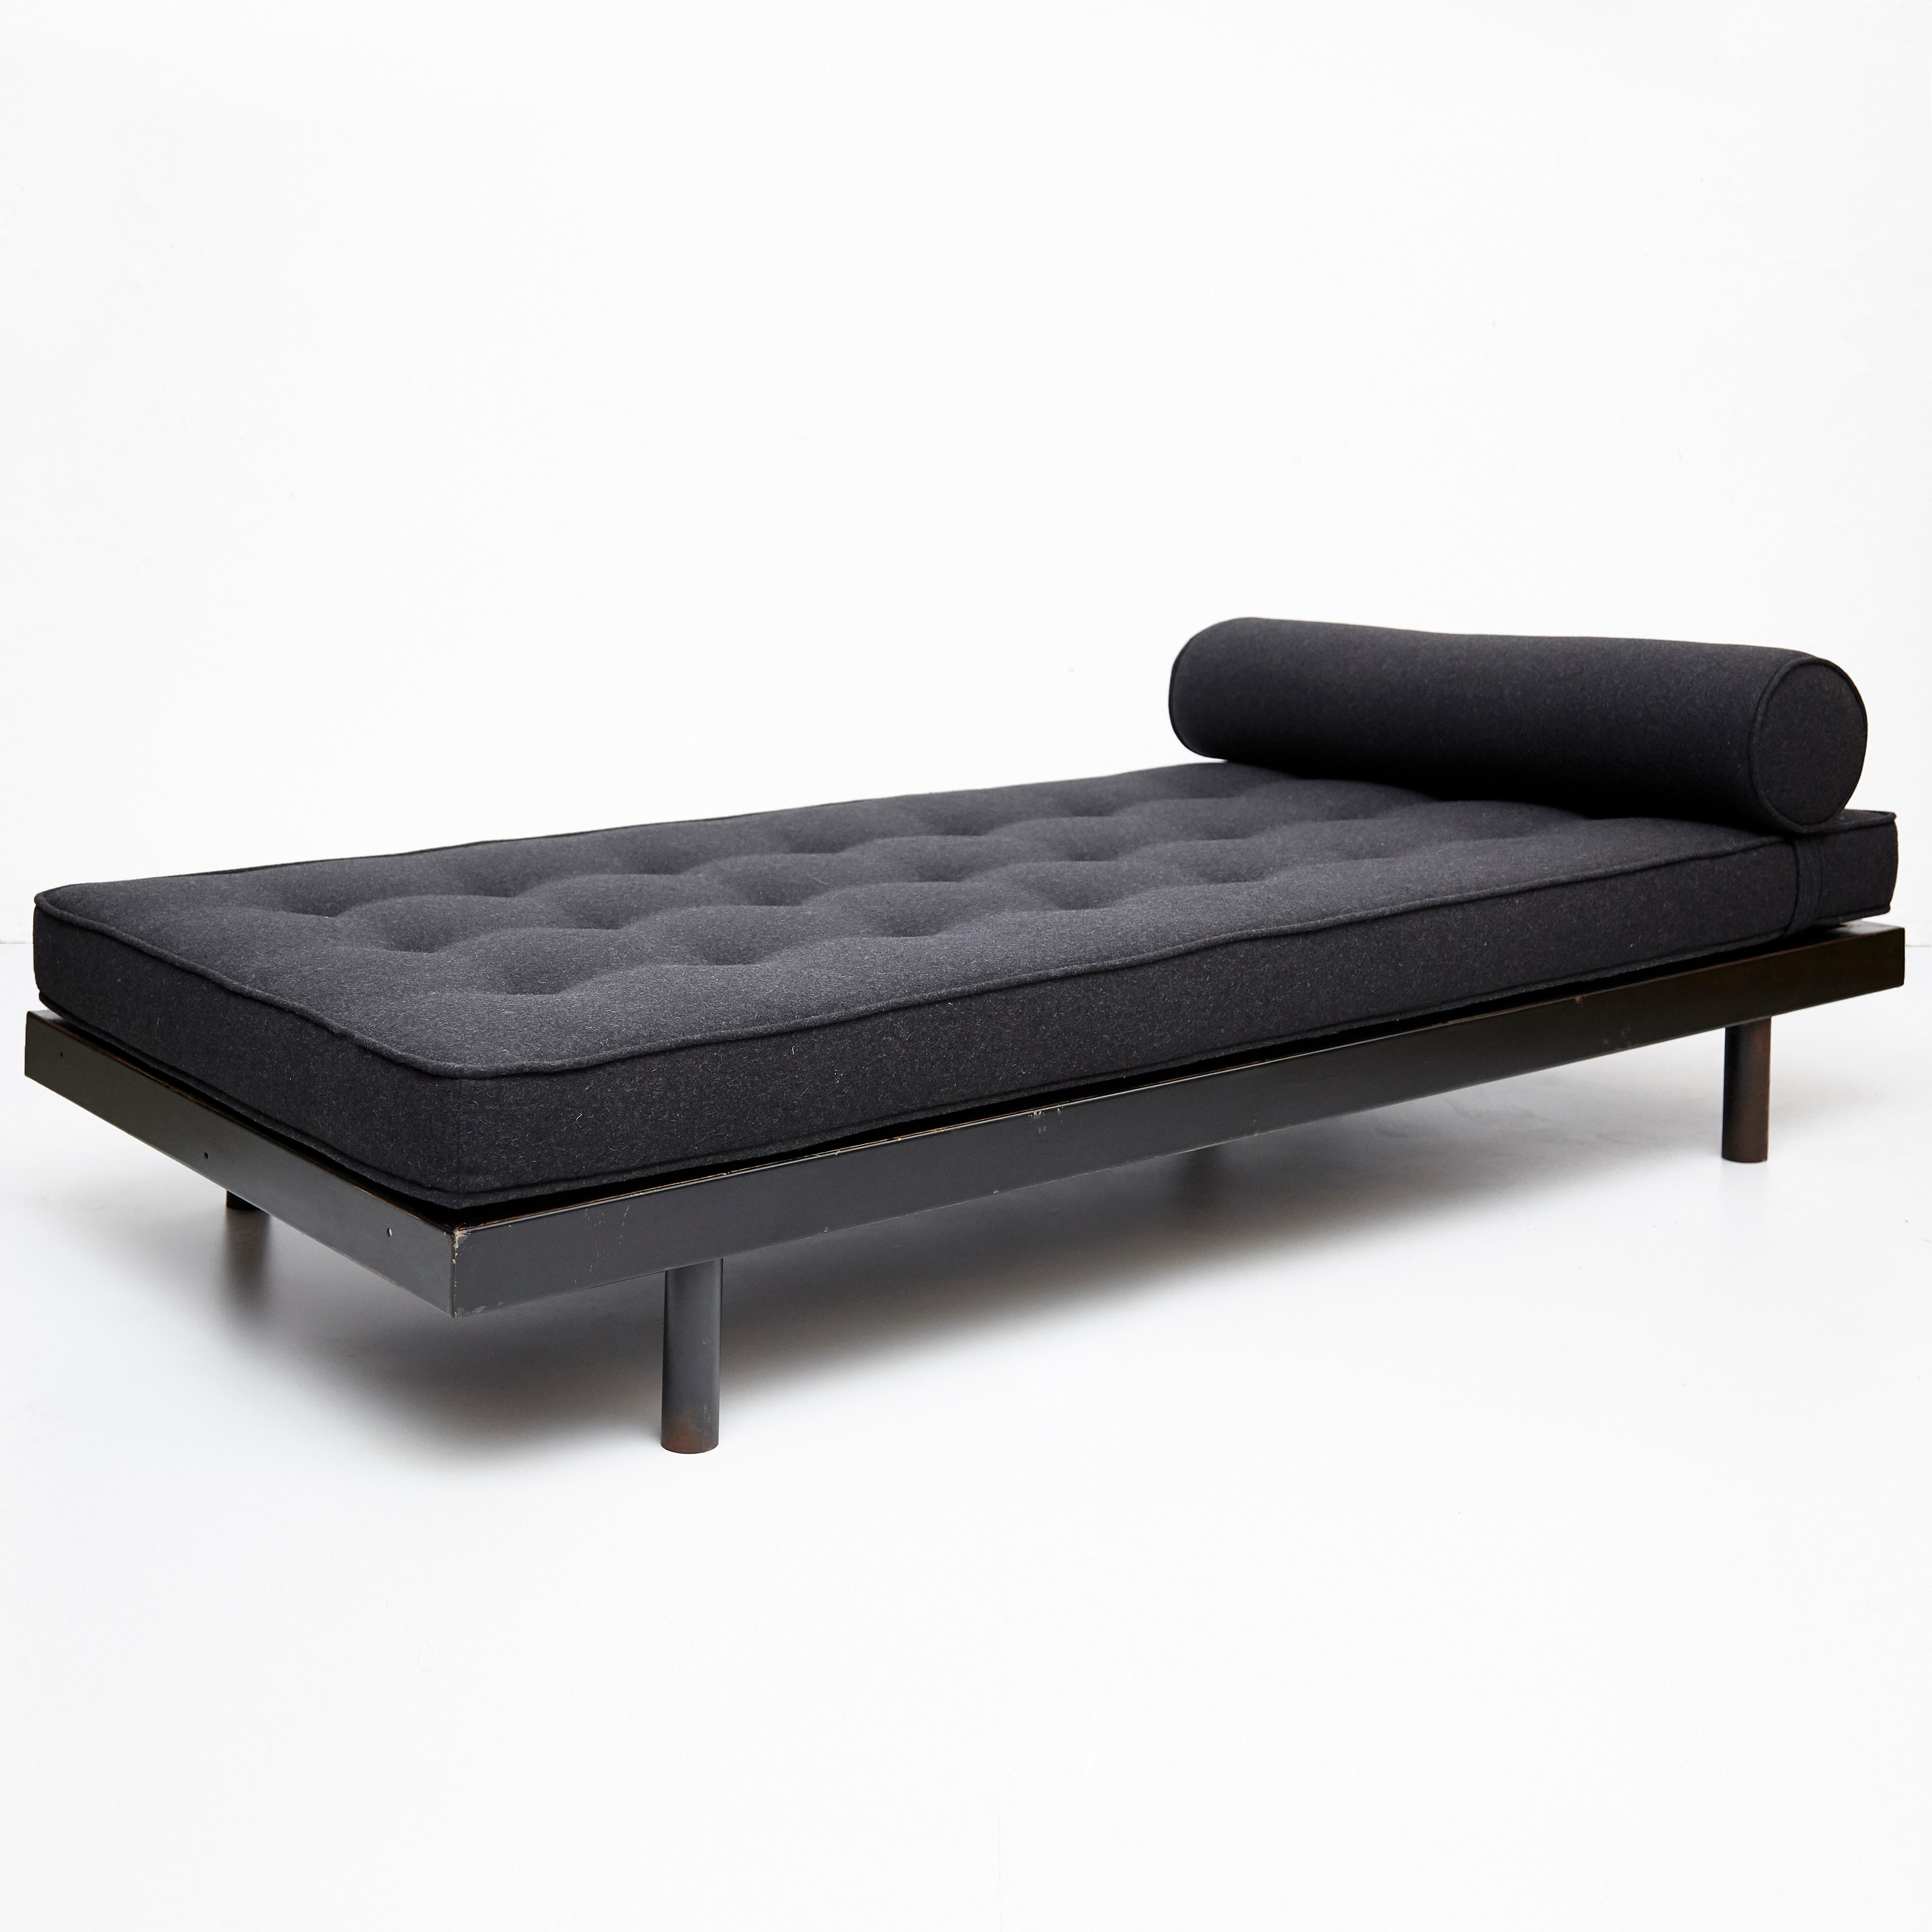 Mid-20th Century Jean Prouvé Mid-Century Modern Black Metal Daybed, circa 1950